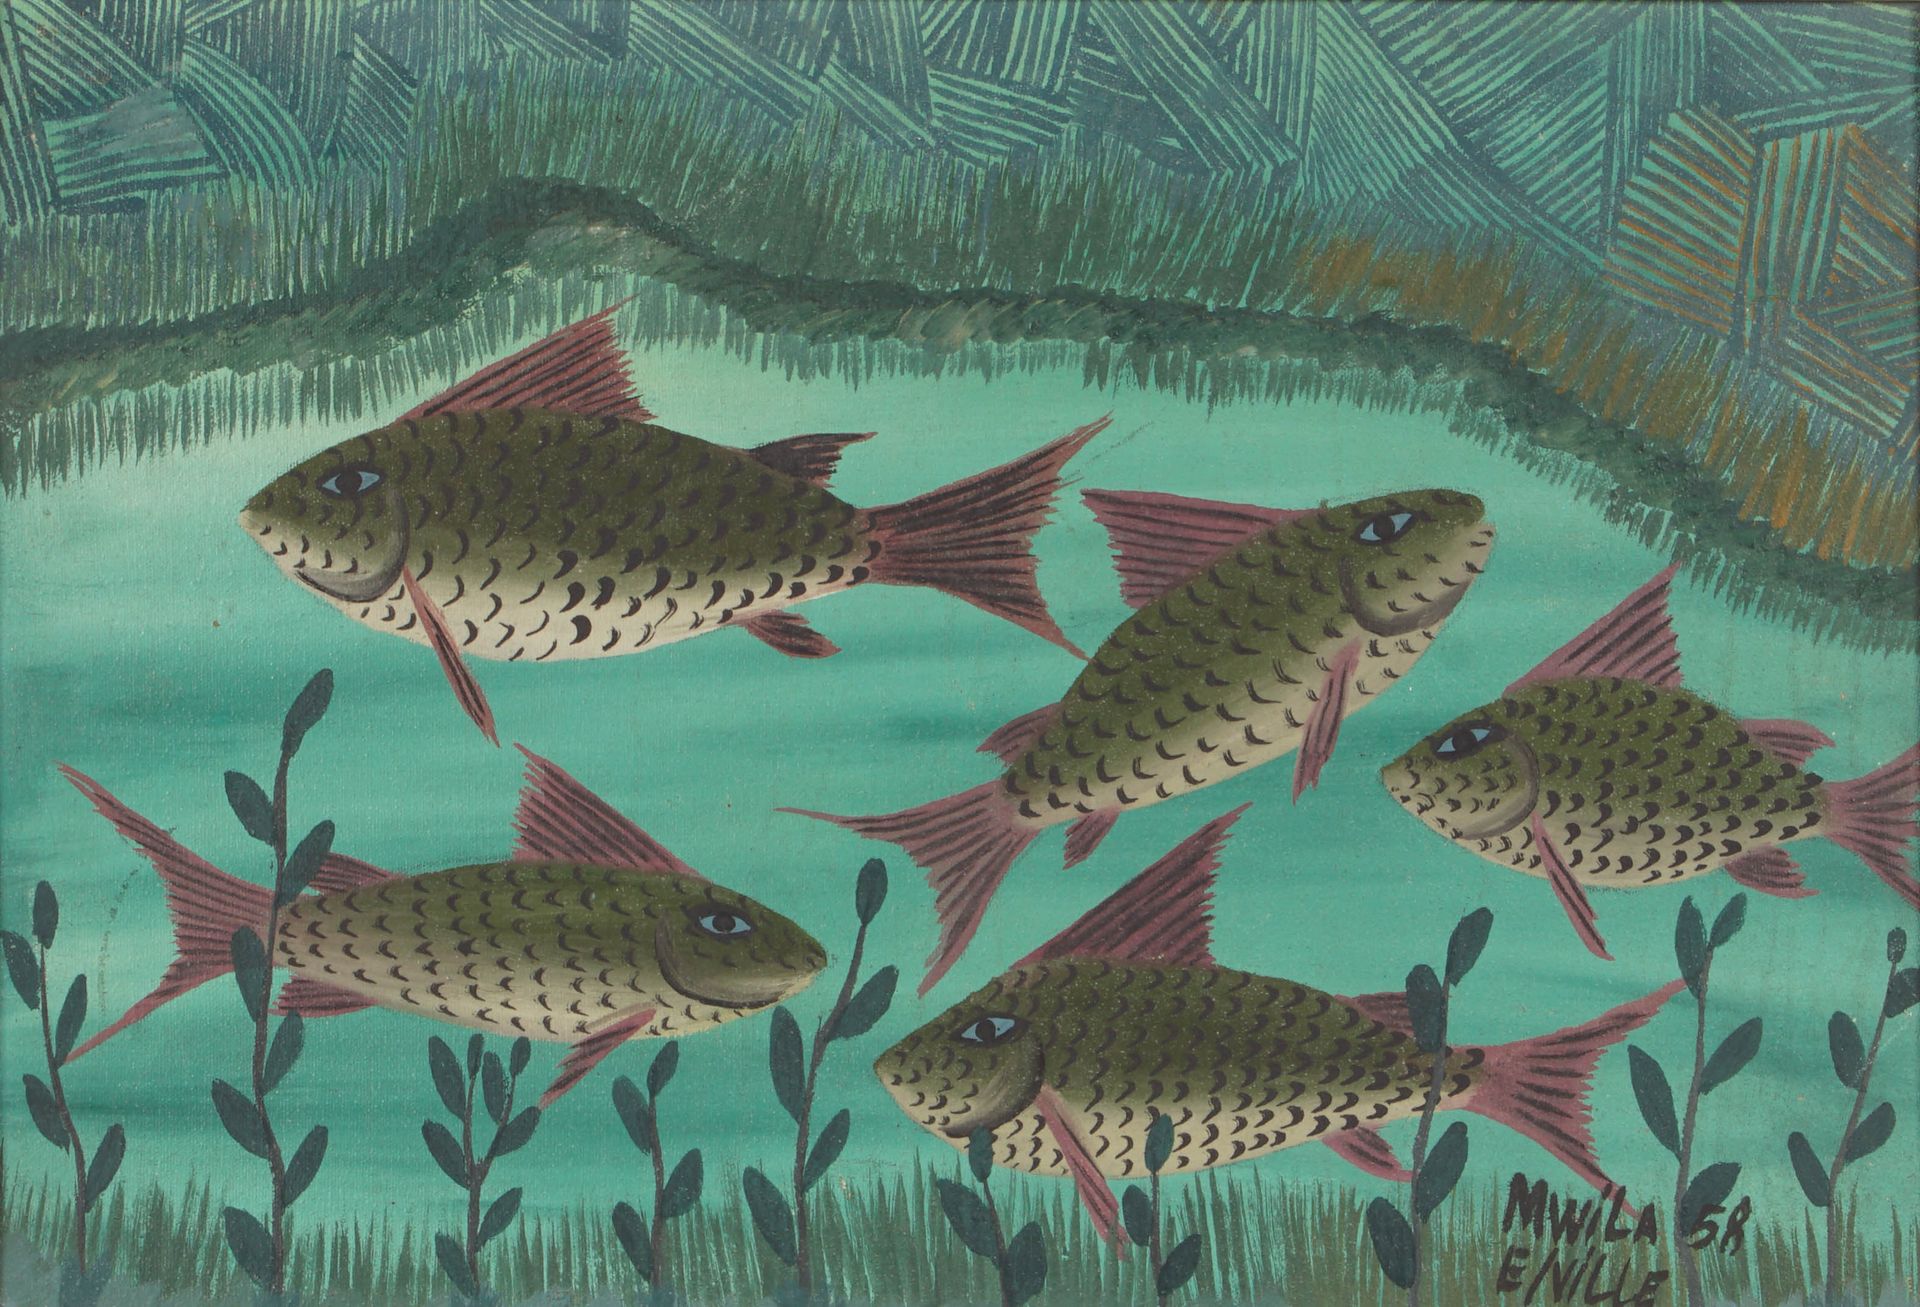 MWILA (act.C.1950-1970) Untitled (Fish). 31 x 45 cm. Signed, dated 1958, framed.&hellip;